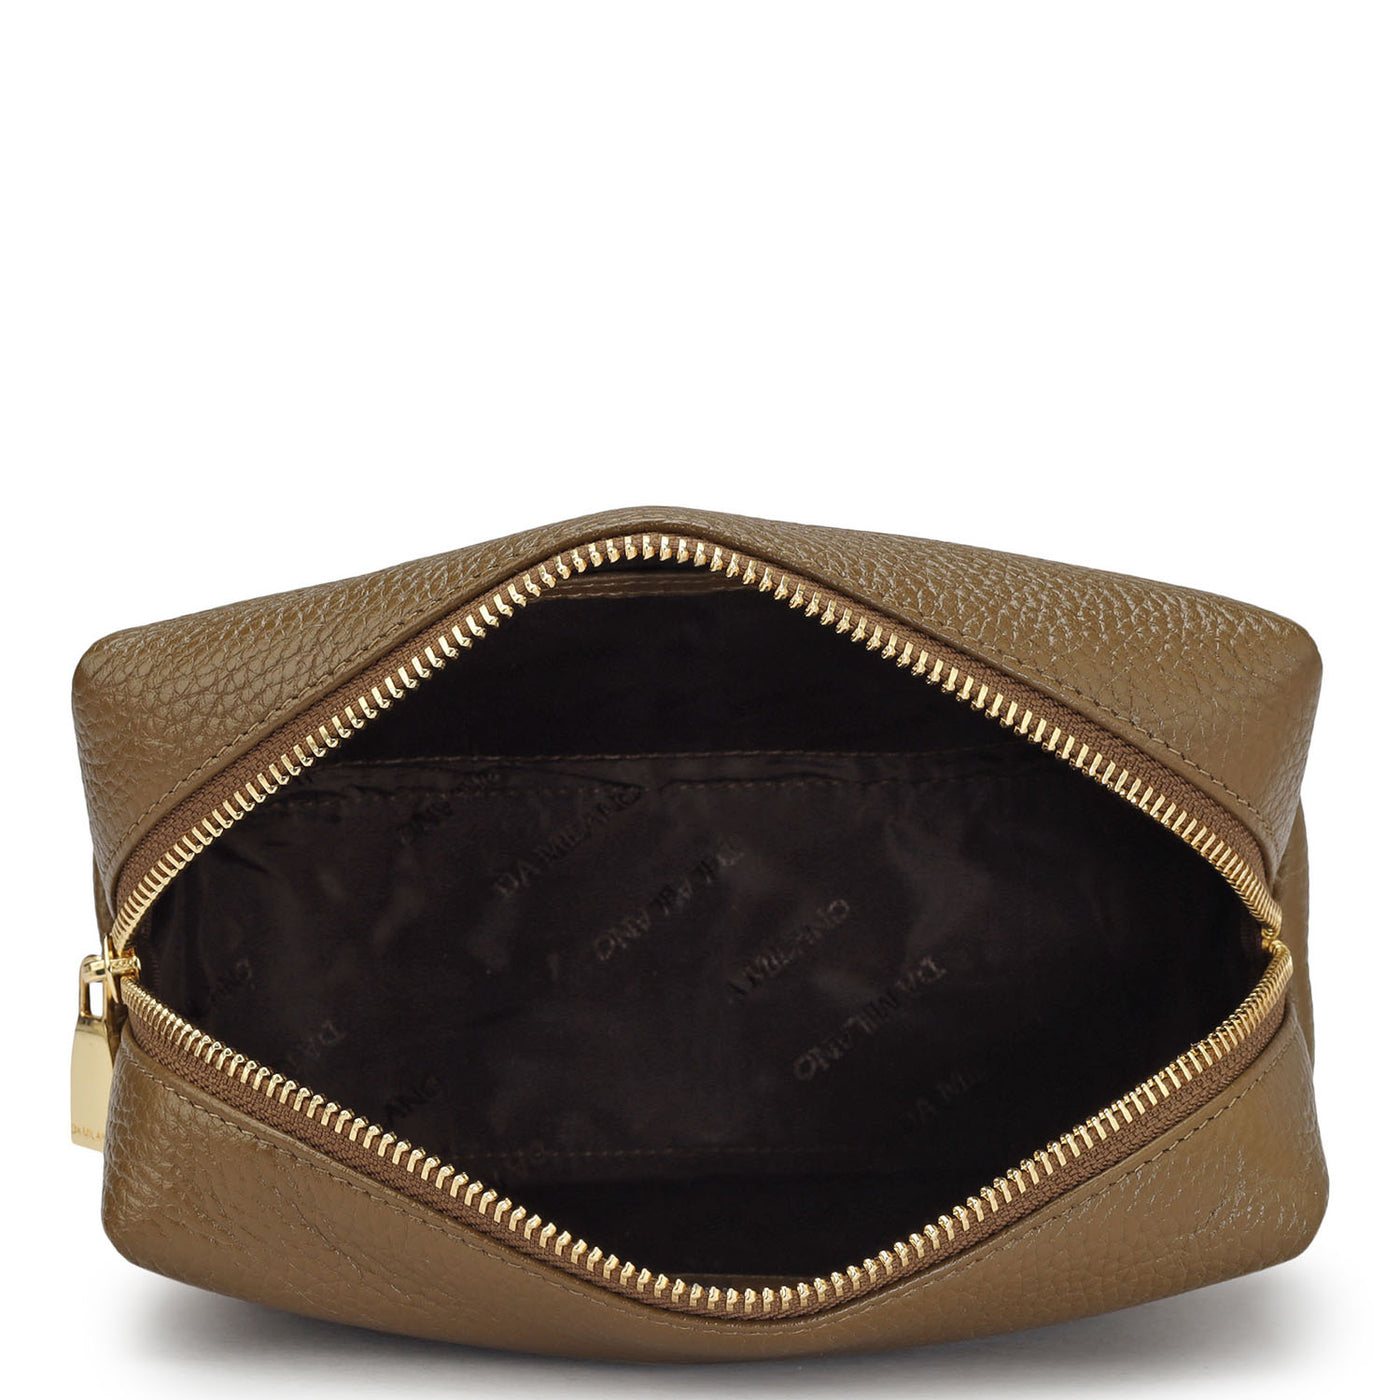 Wax Leather Vanity Pouch - Moss